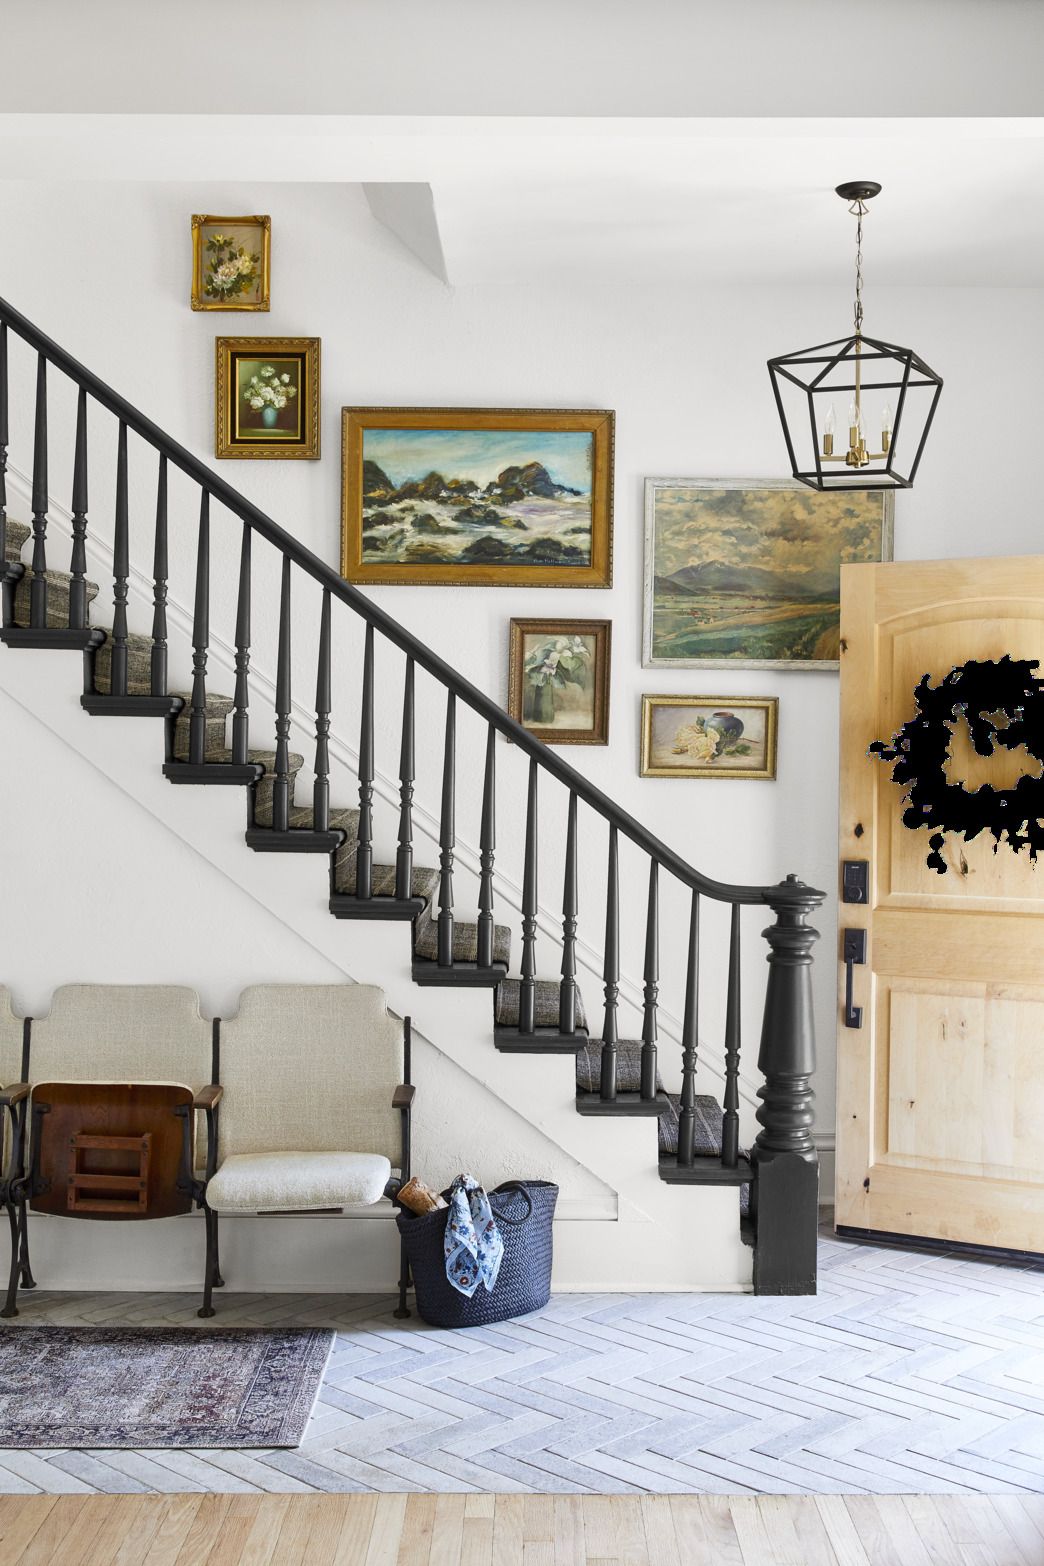 55 Best Staircase Ideas - Top Ways To Decorate A Stairway